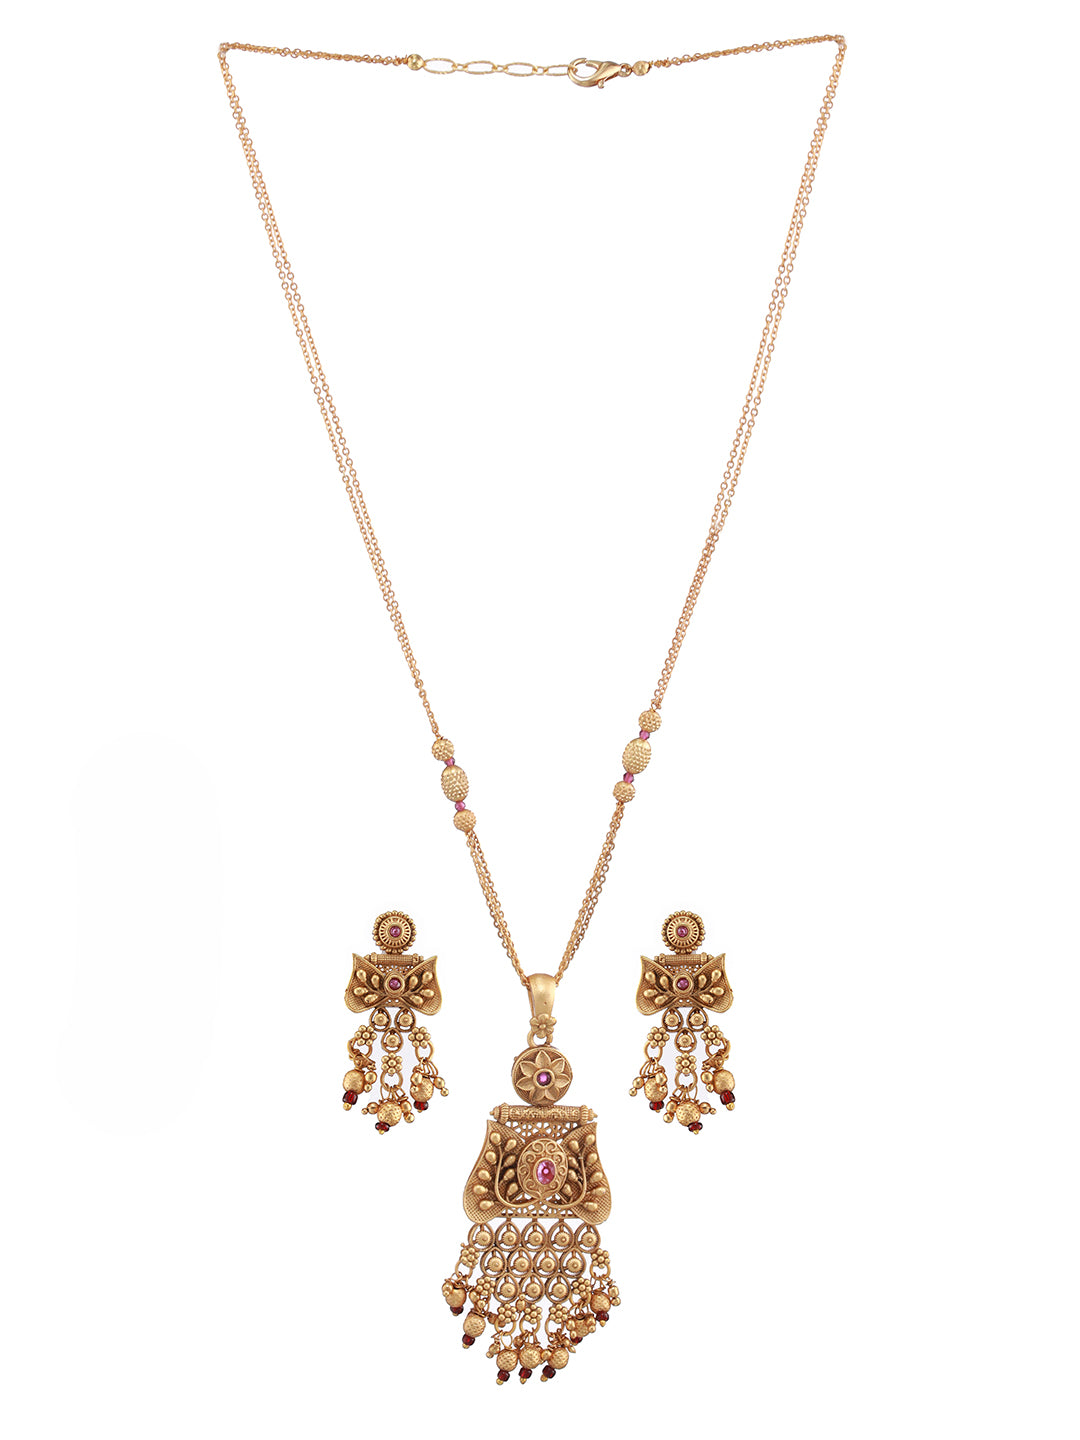 24K Gold-Plated Pink & Ruby Studded Handcrafted Filigree Jewellery Set